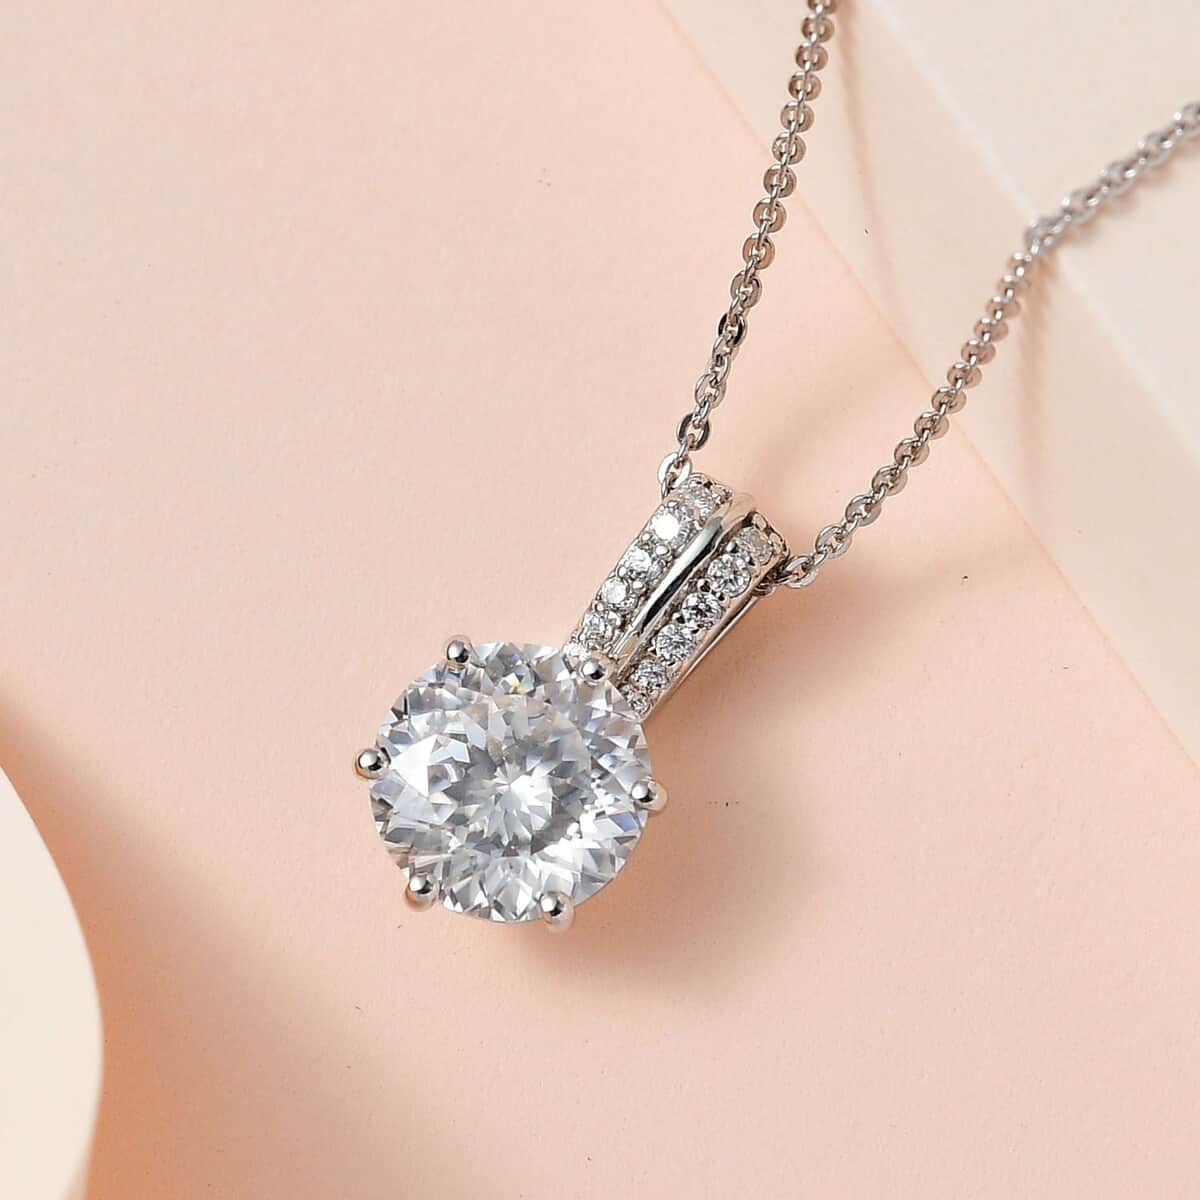 Moissanite 1.65 ctw Pendant Necklace, Solitaire Pendant Necklace, Pendant Necklace, Platinum Over Sterling Silver Pendant Necklace 20 Inch image number 1